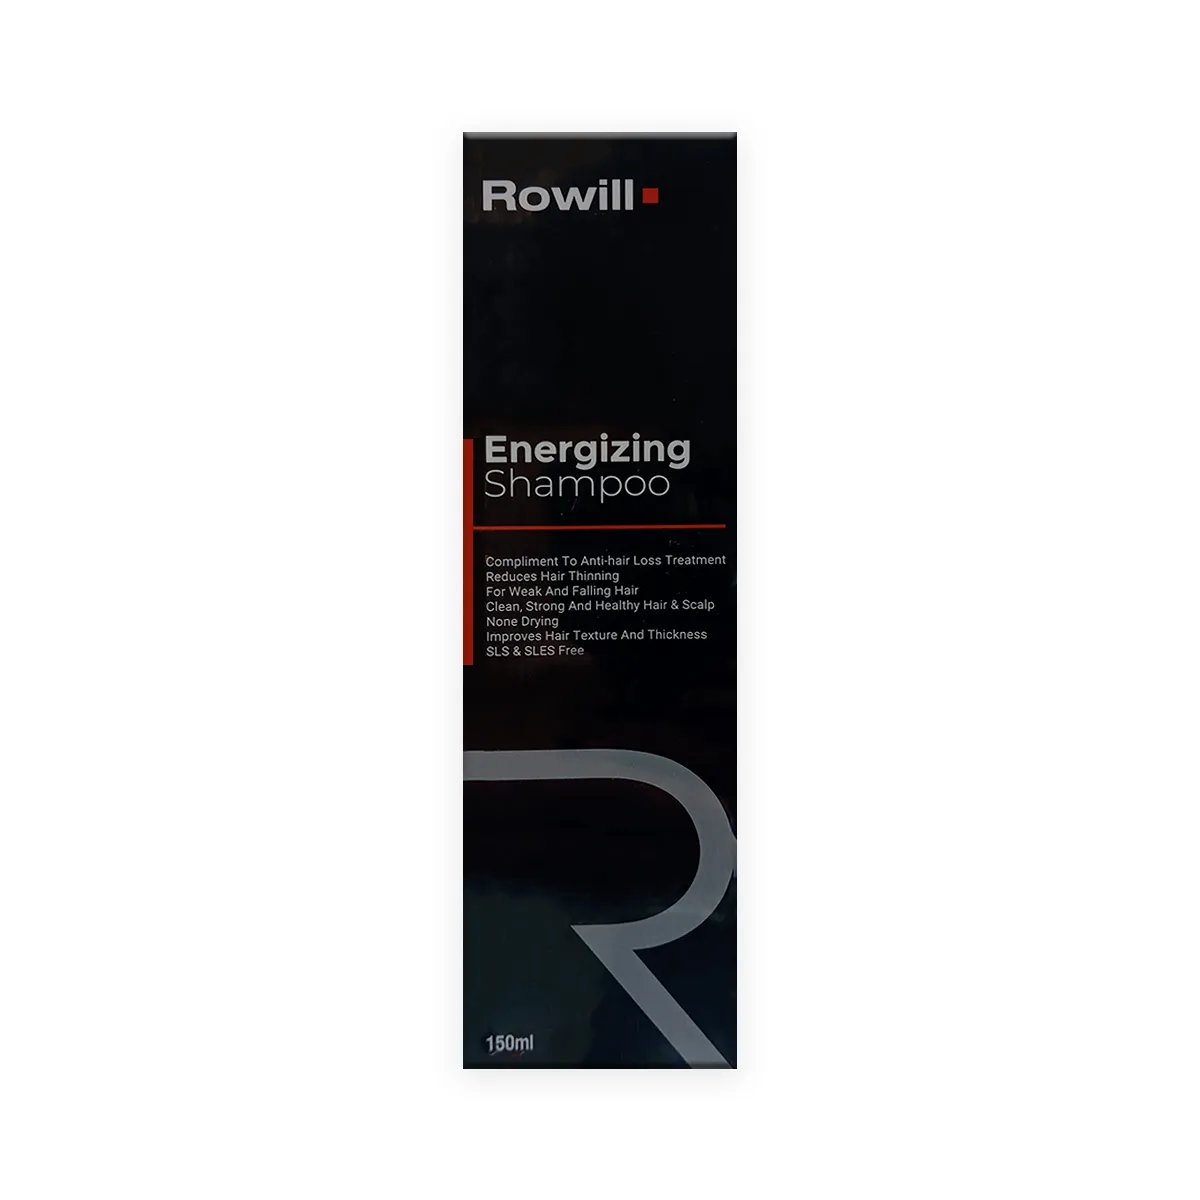 First product image of Rowill Energizing Shampoo 150ml